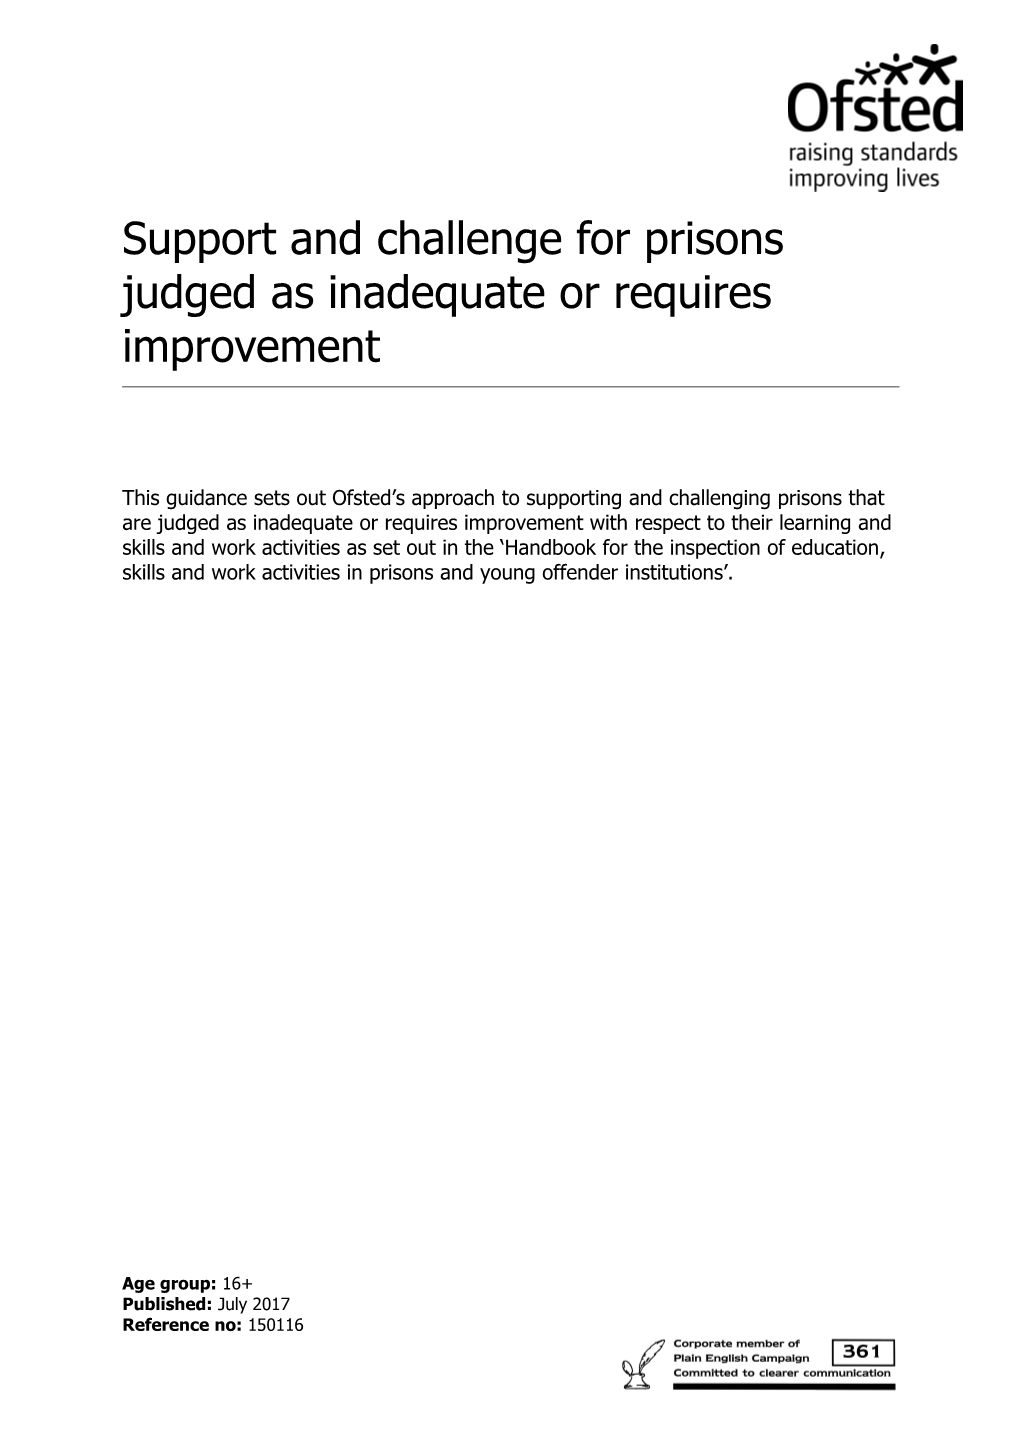 Support and Challenge for Prisons Judged As Inadequate Or Requires Improvement